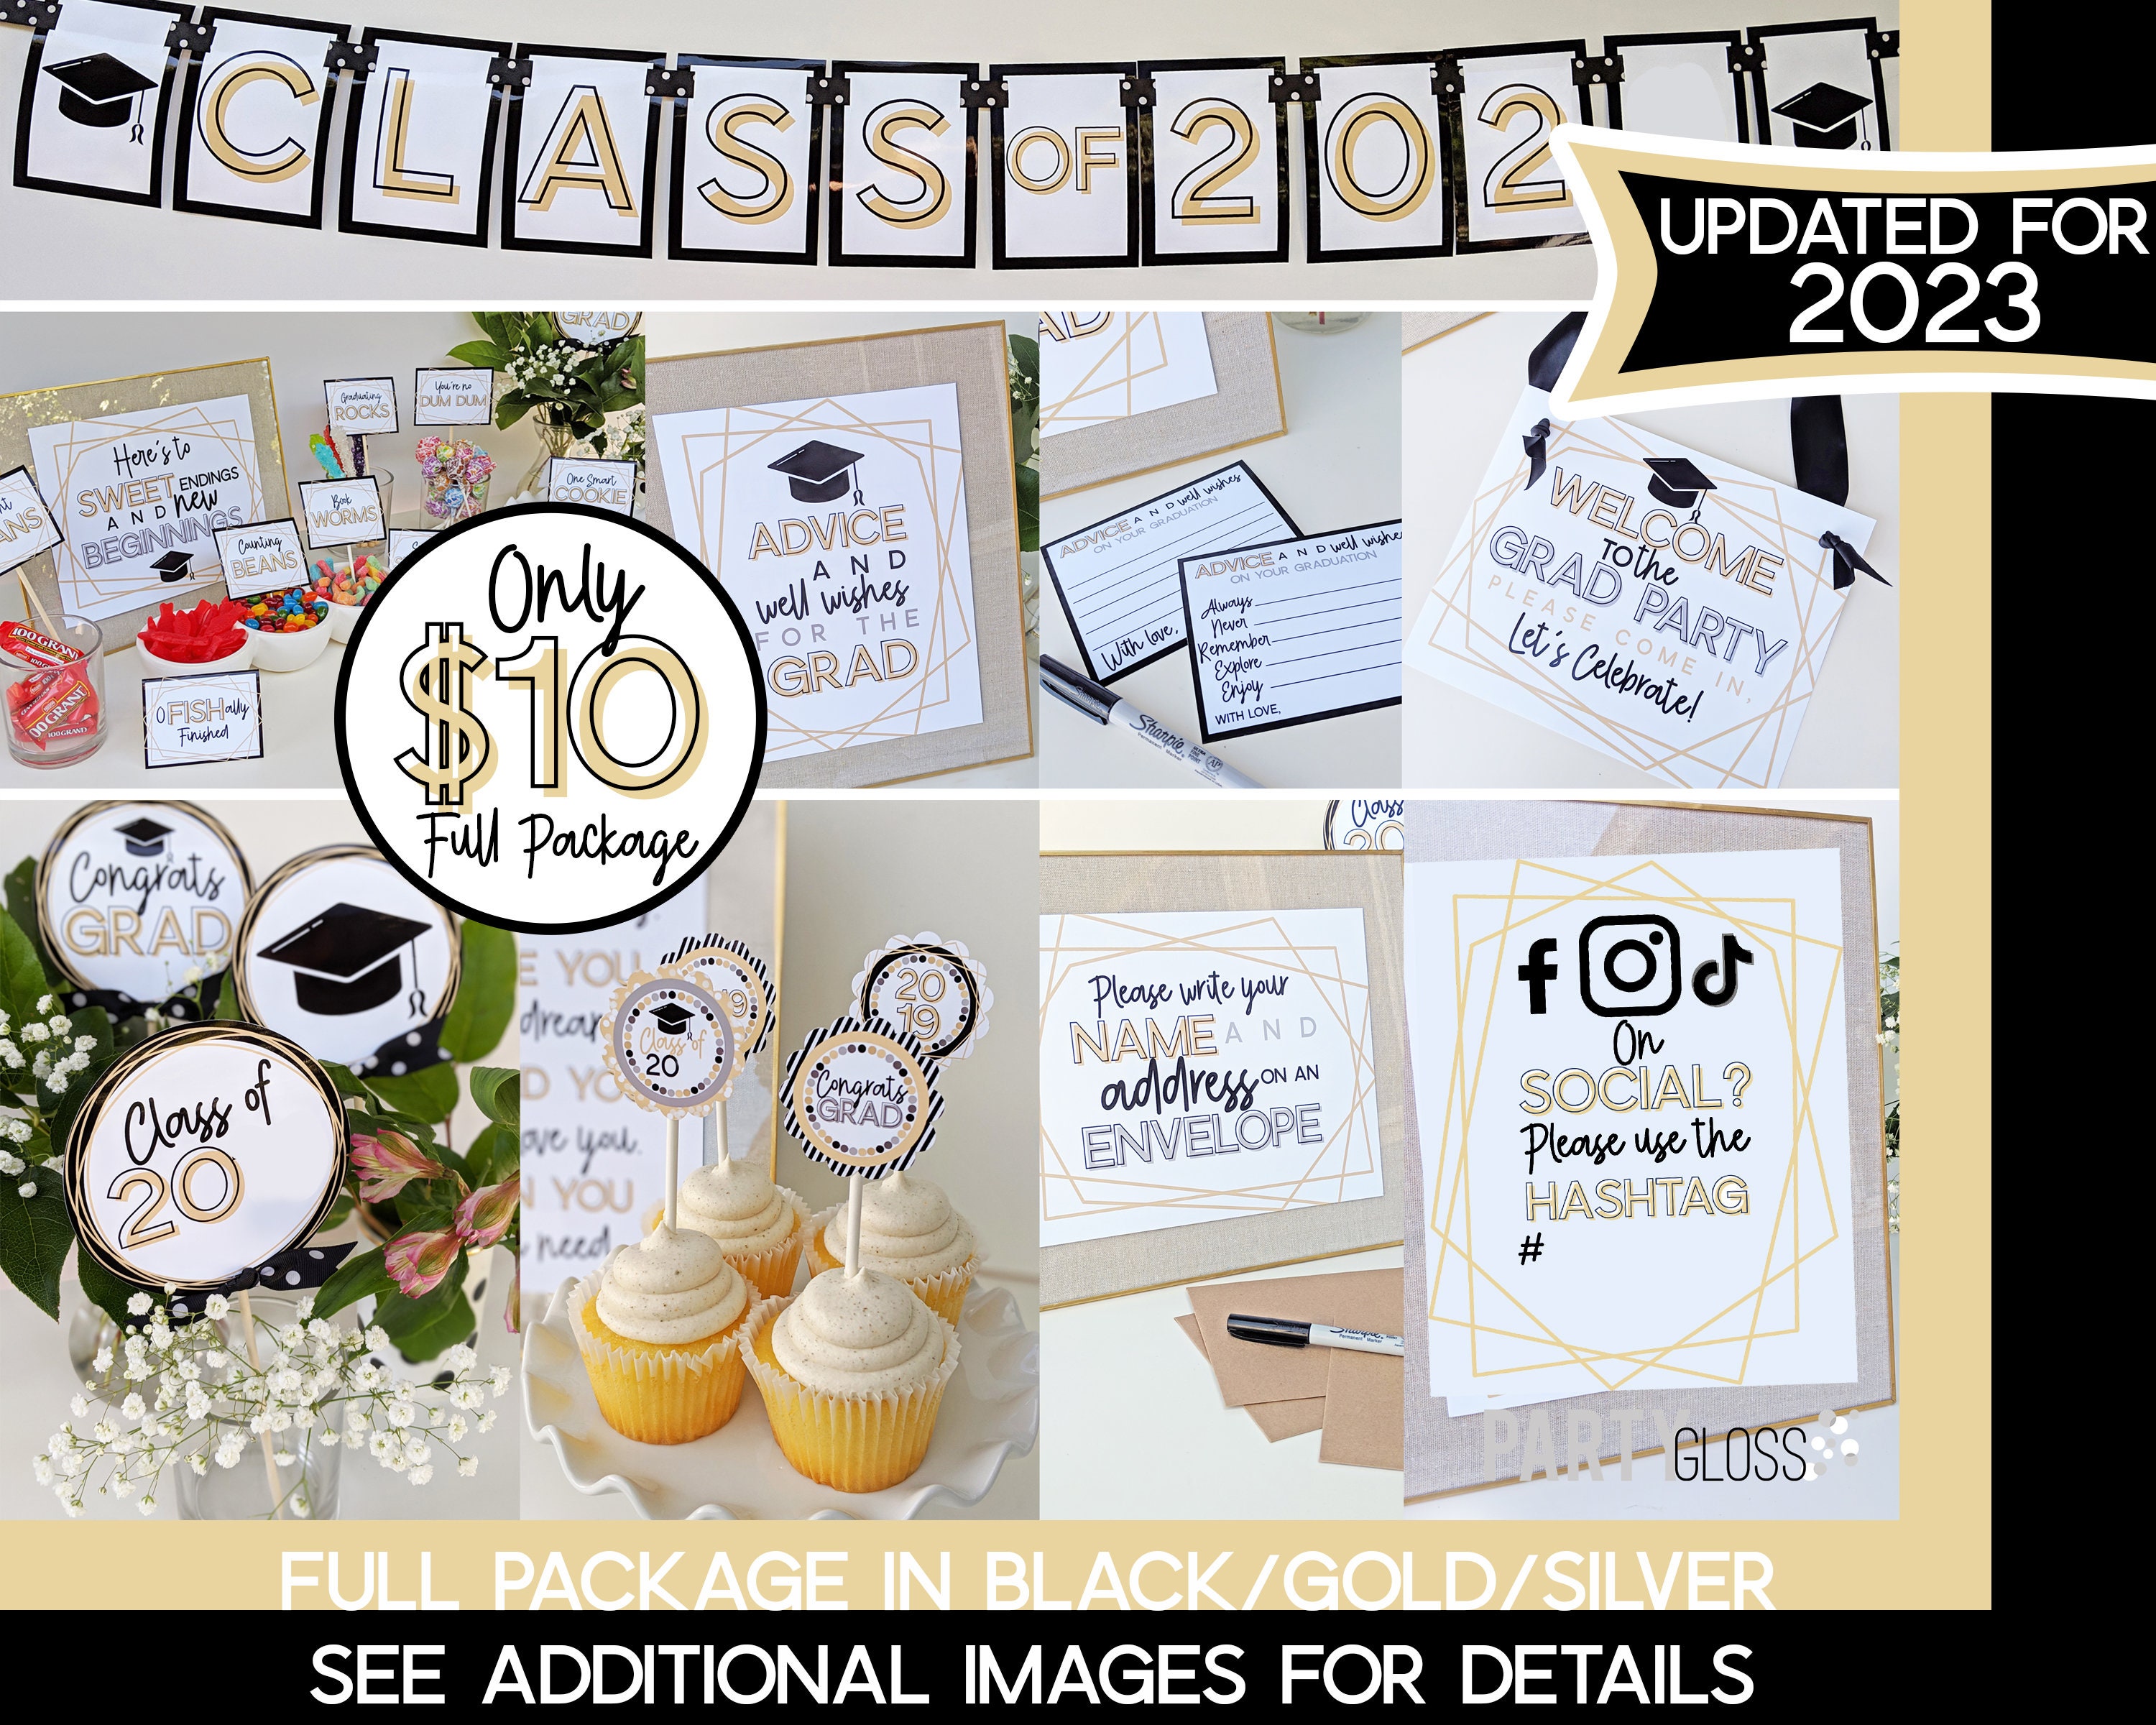 Black And White Graduation Party Ideas #diypartydecorationsgold  White  party decorations, Black and white party decorations, Black party  decorations